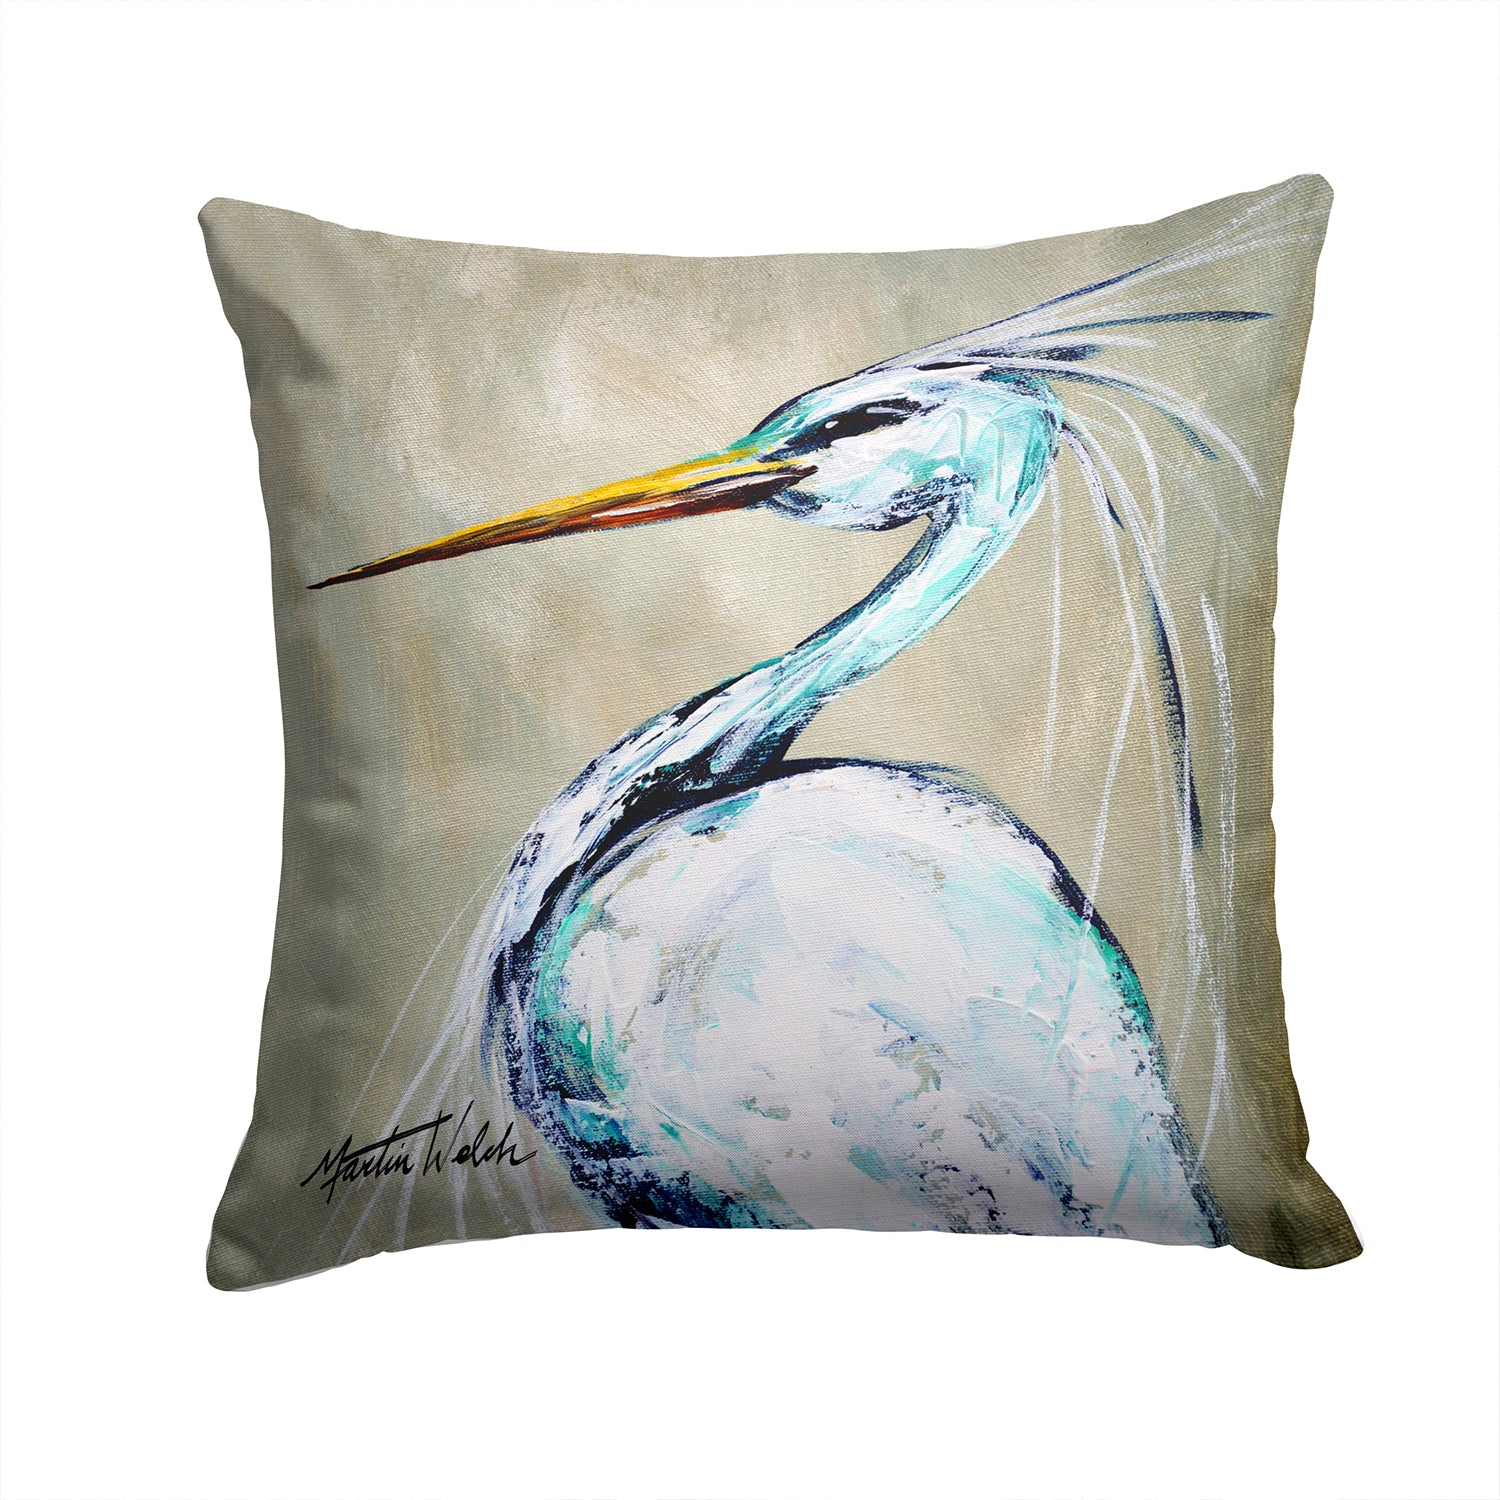 Buy this Blue Heron Smitty's Brother Fabric Decorative Pillow